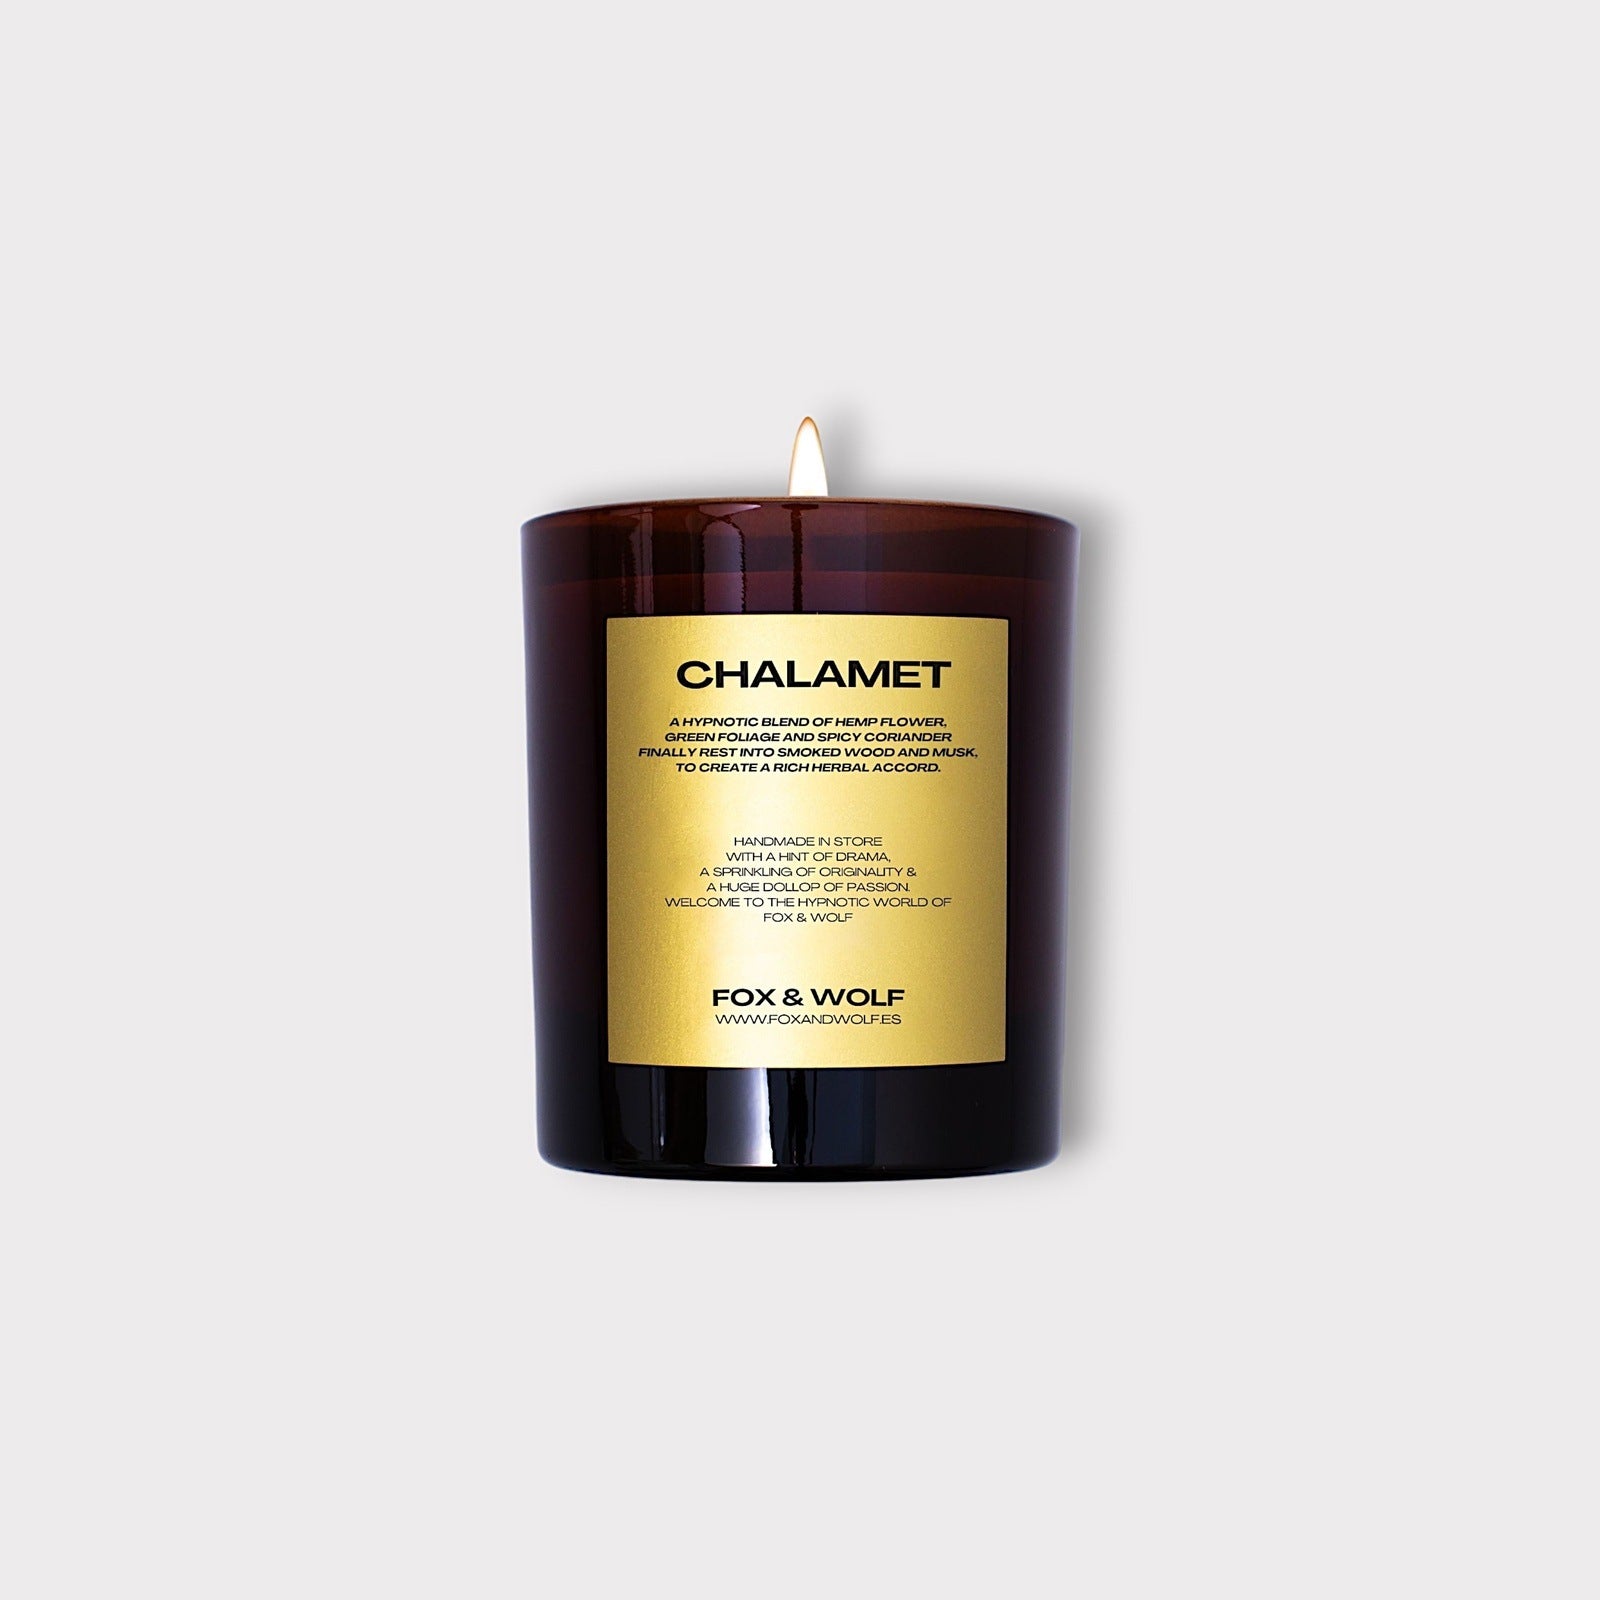 300 G CHALAMET SCENTED CANDLE